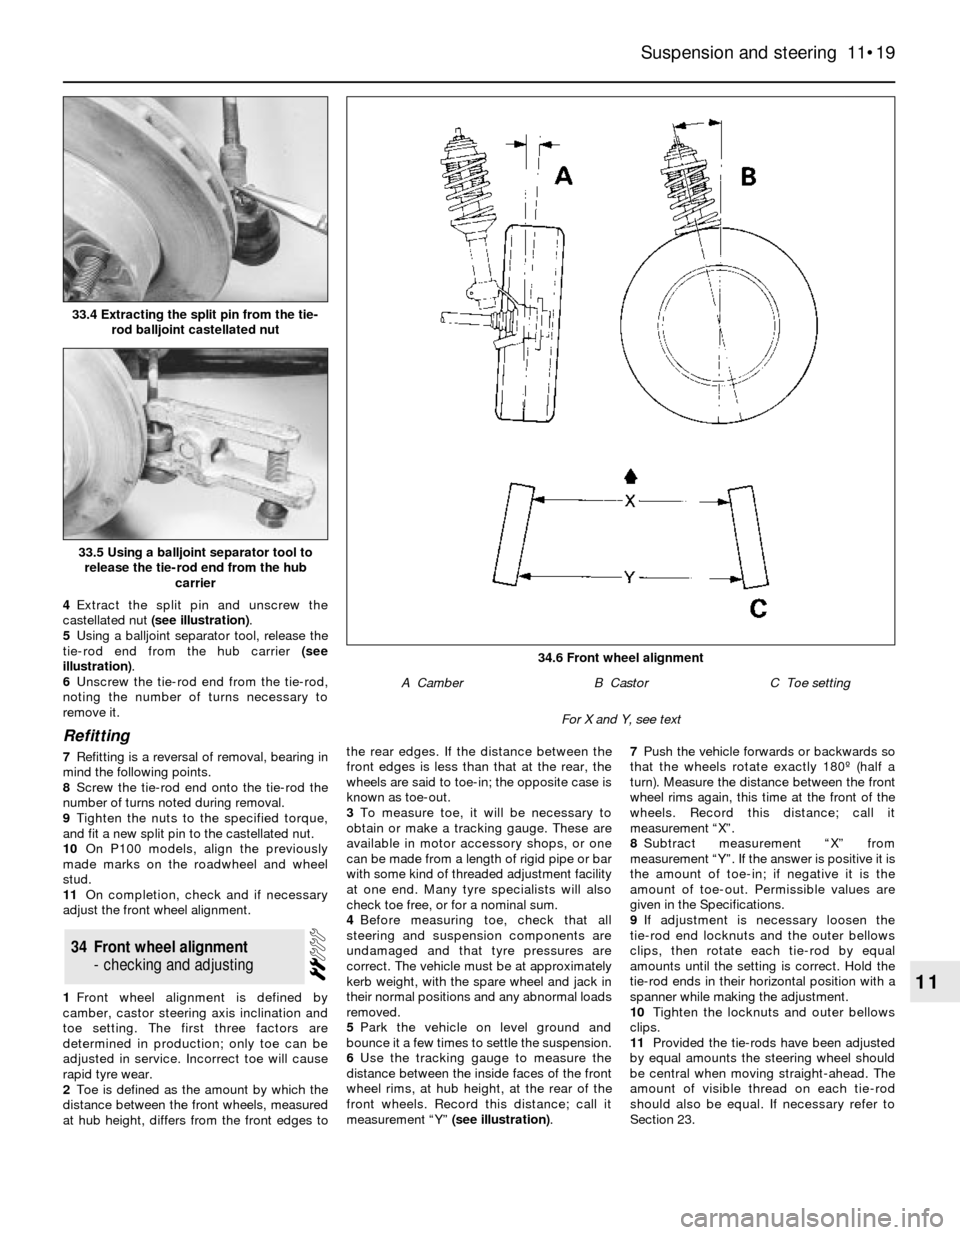 FORD SIERRA 1986 1.G Suspension And Steering Workshop Manual 4Extract the split pin and unscrew the
castellated nut (see illustration).
5Using a balljoint separator tool, release the
tie-rod end from the hub carrier (see
illustration).
6Unscrew the tie-rod end 